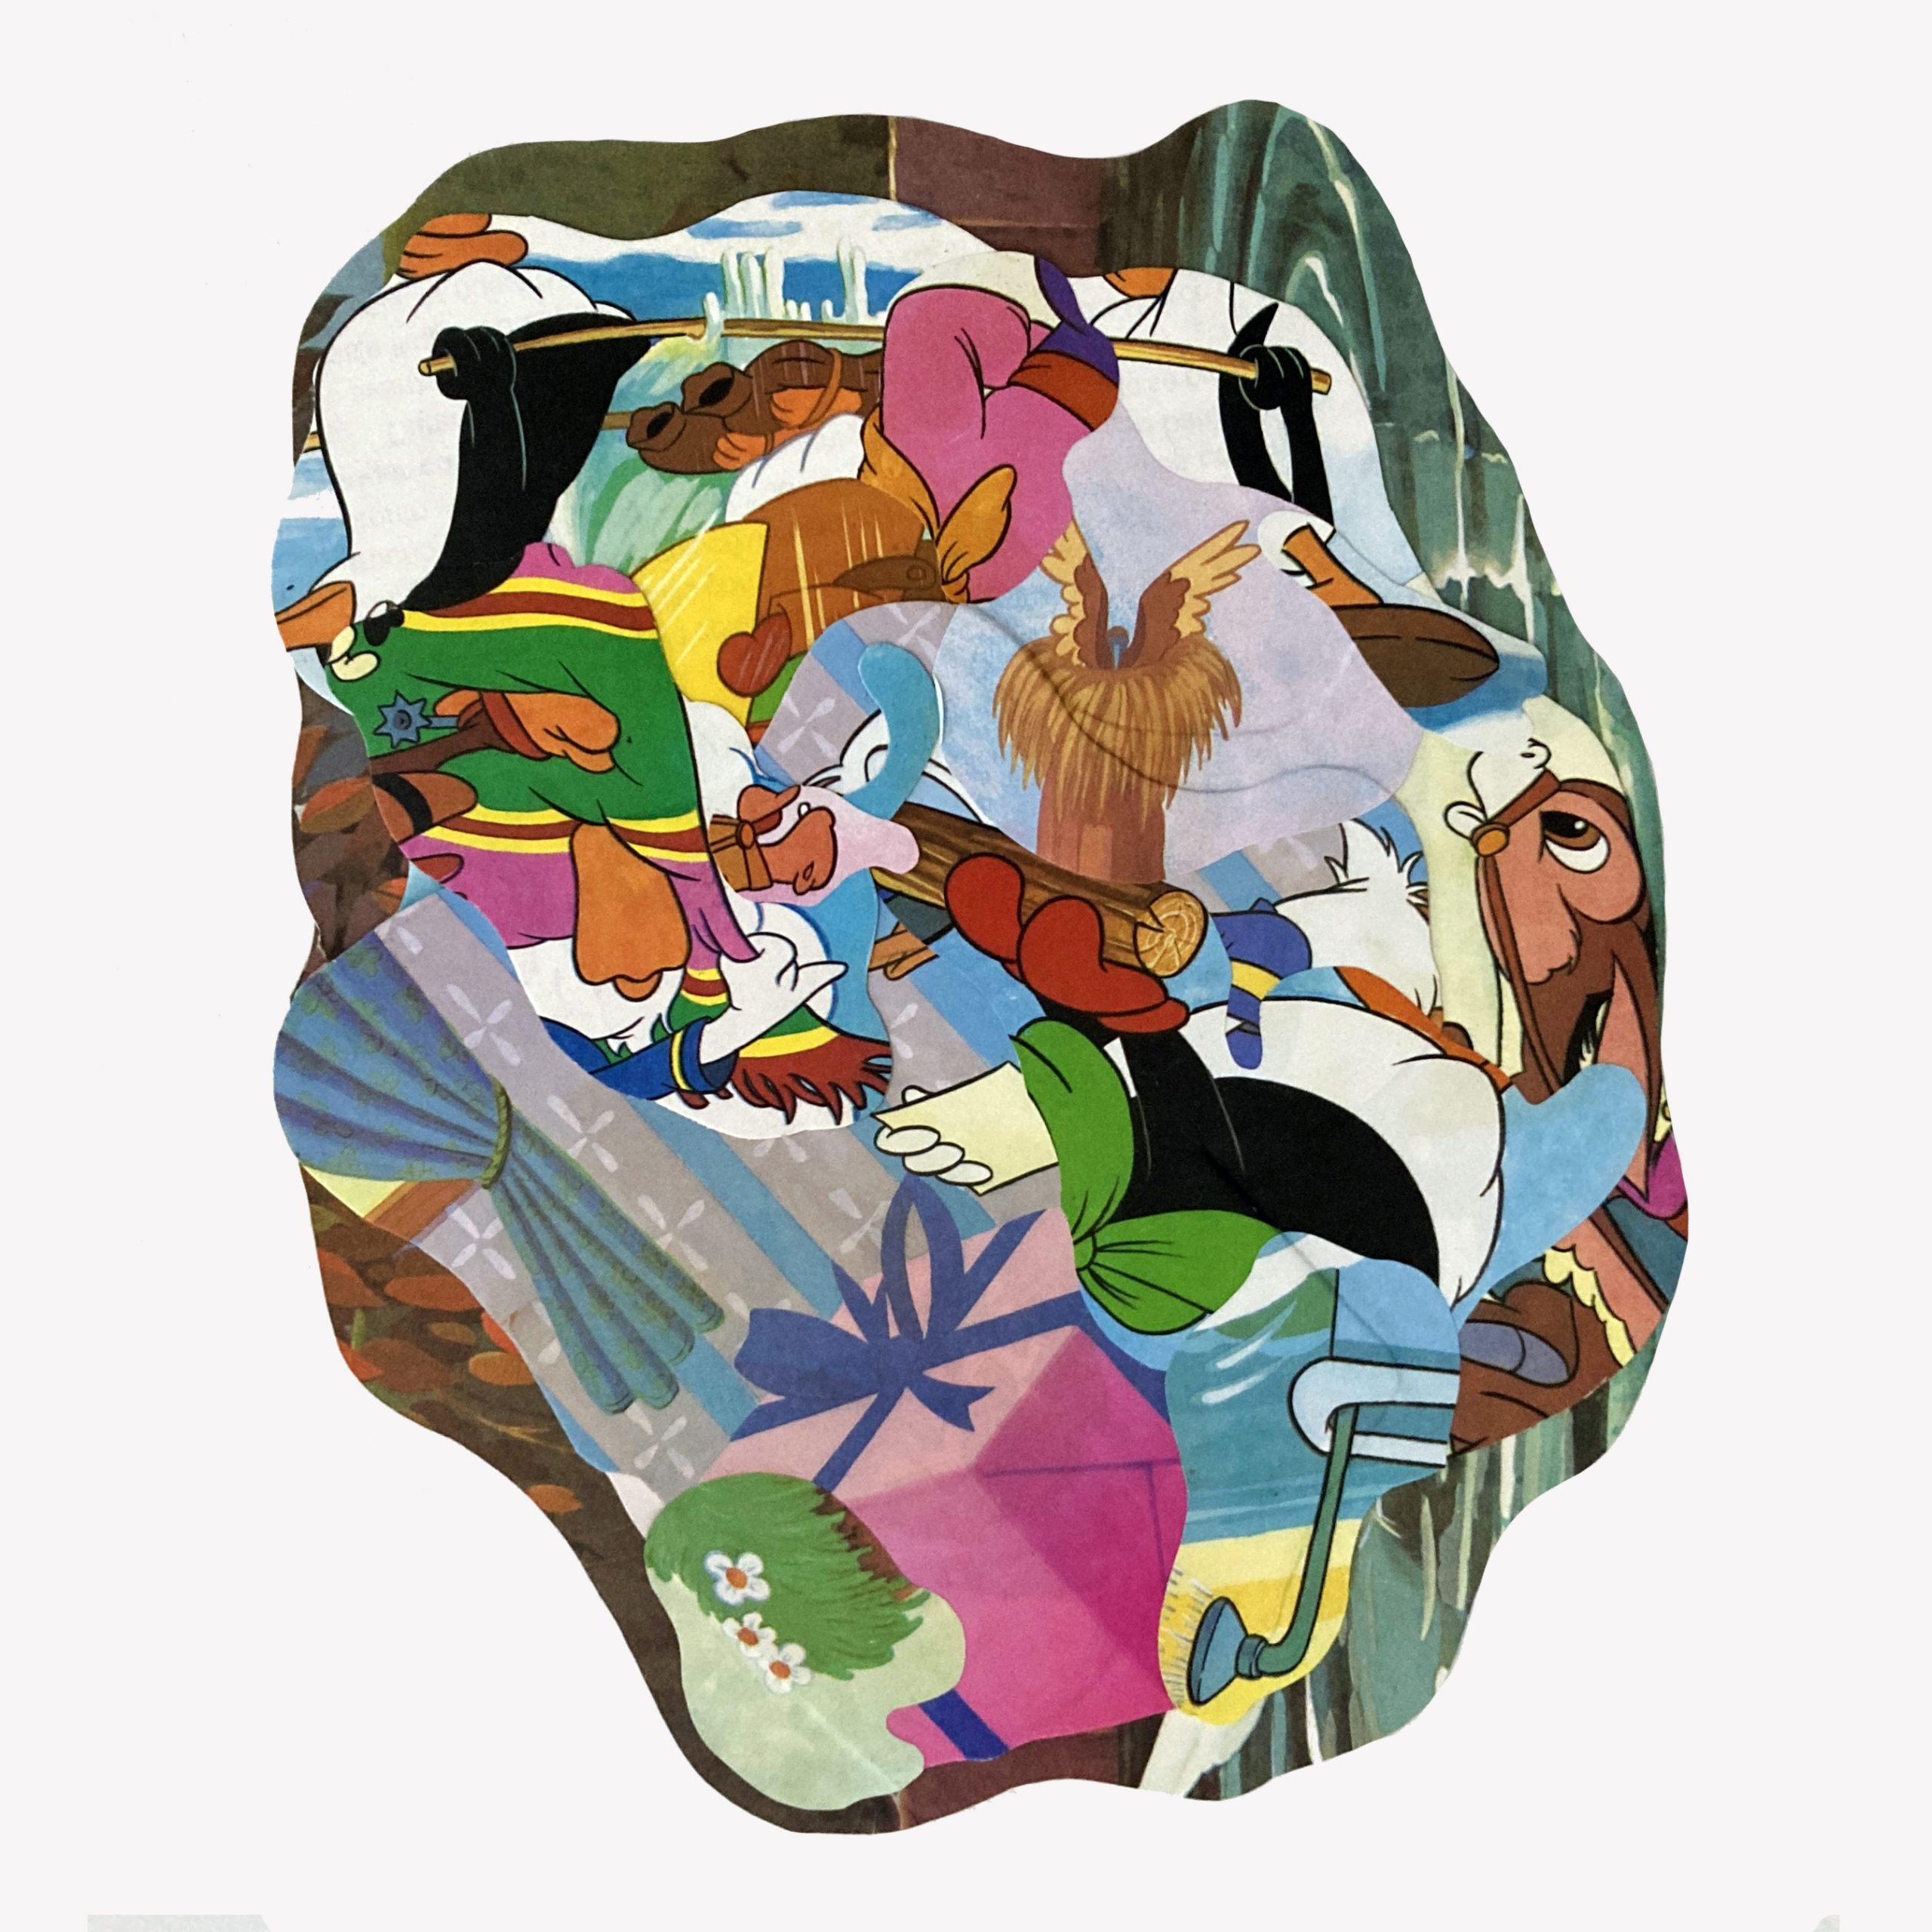 An asymmetrical shape contains overlapping layers of collaged cartoon cutouts in pink, blue, green, black, and white.